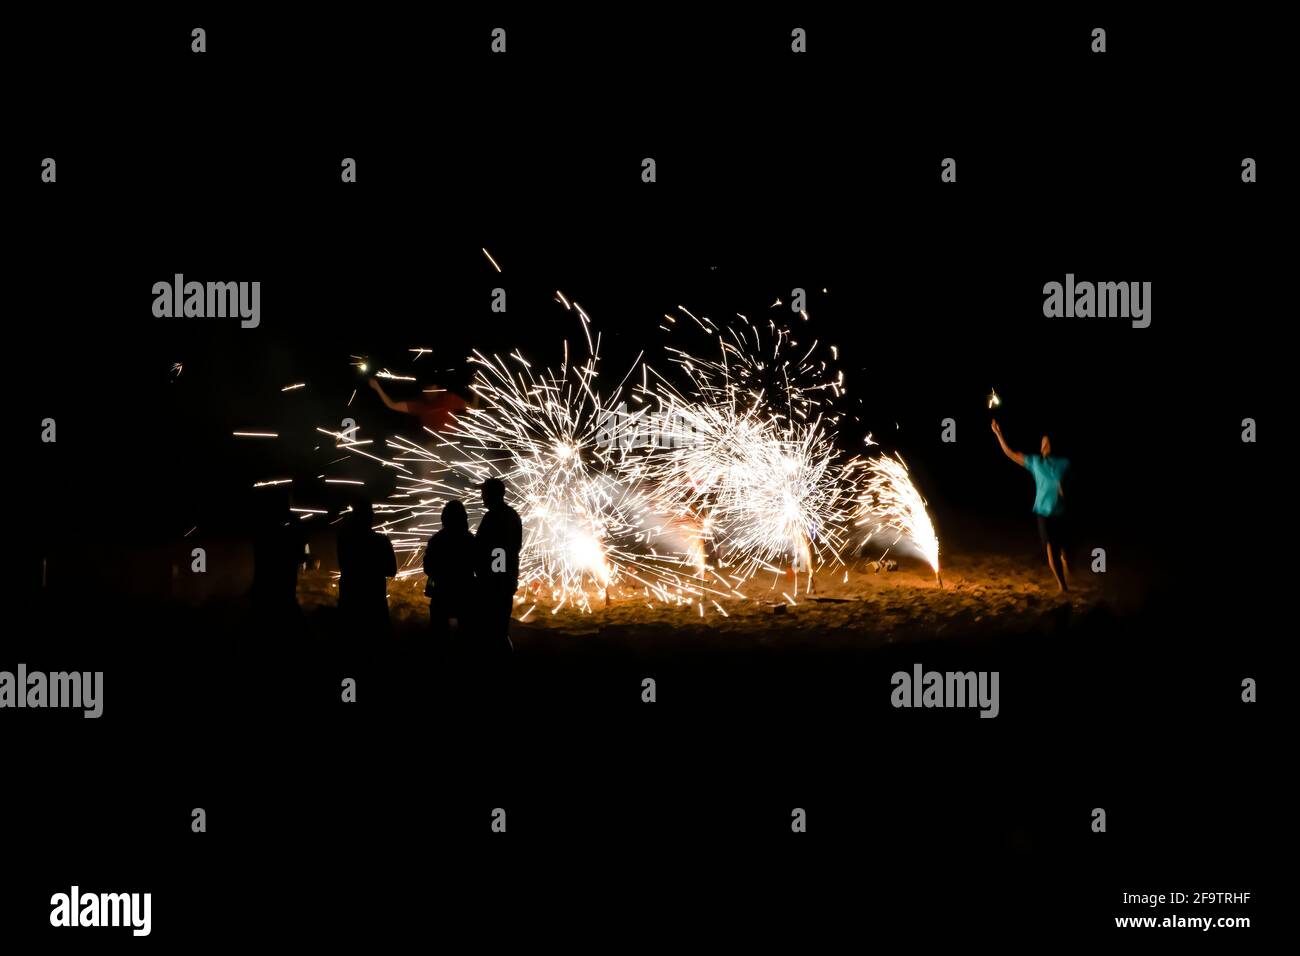 New Year’s Eve celebration on beach with fireworks on black background and people in silhouette. Stock Photo